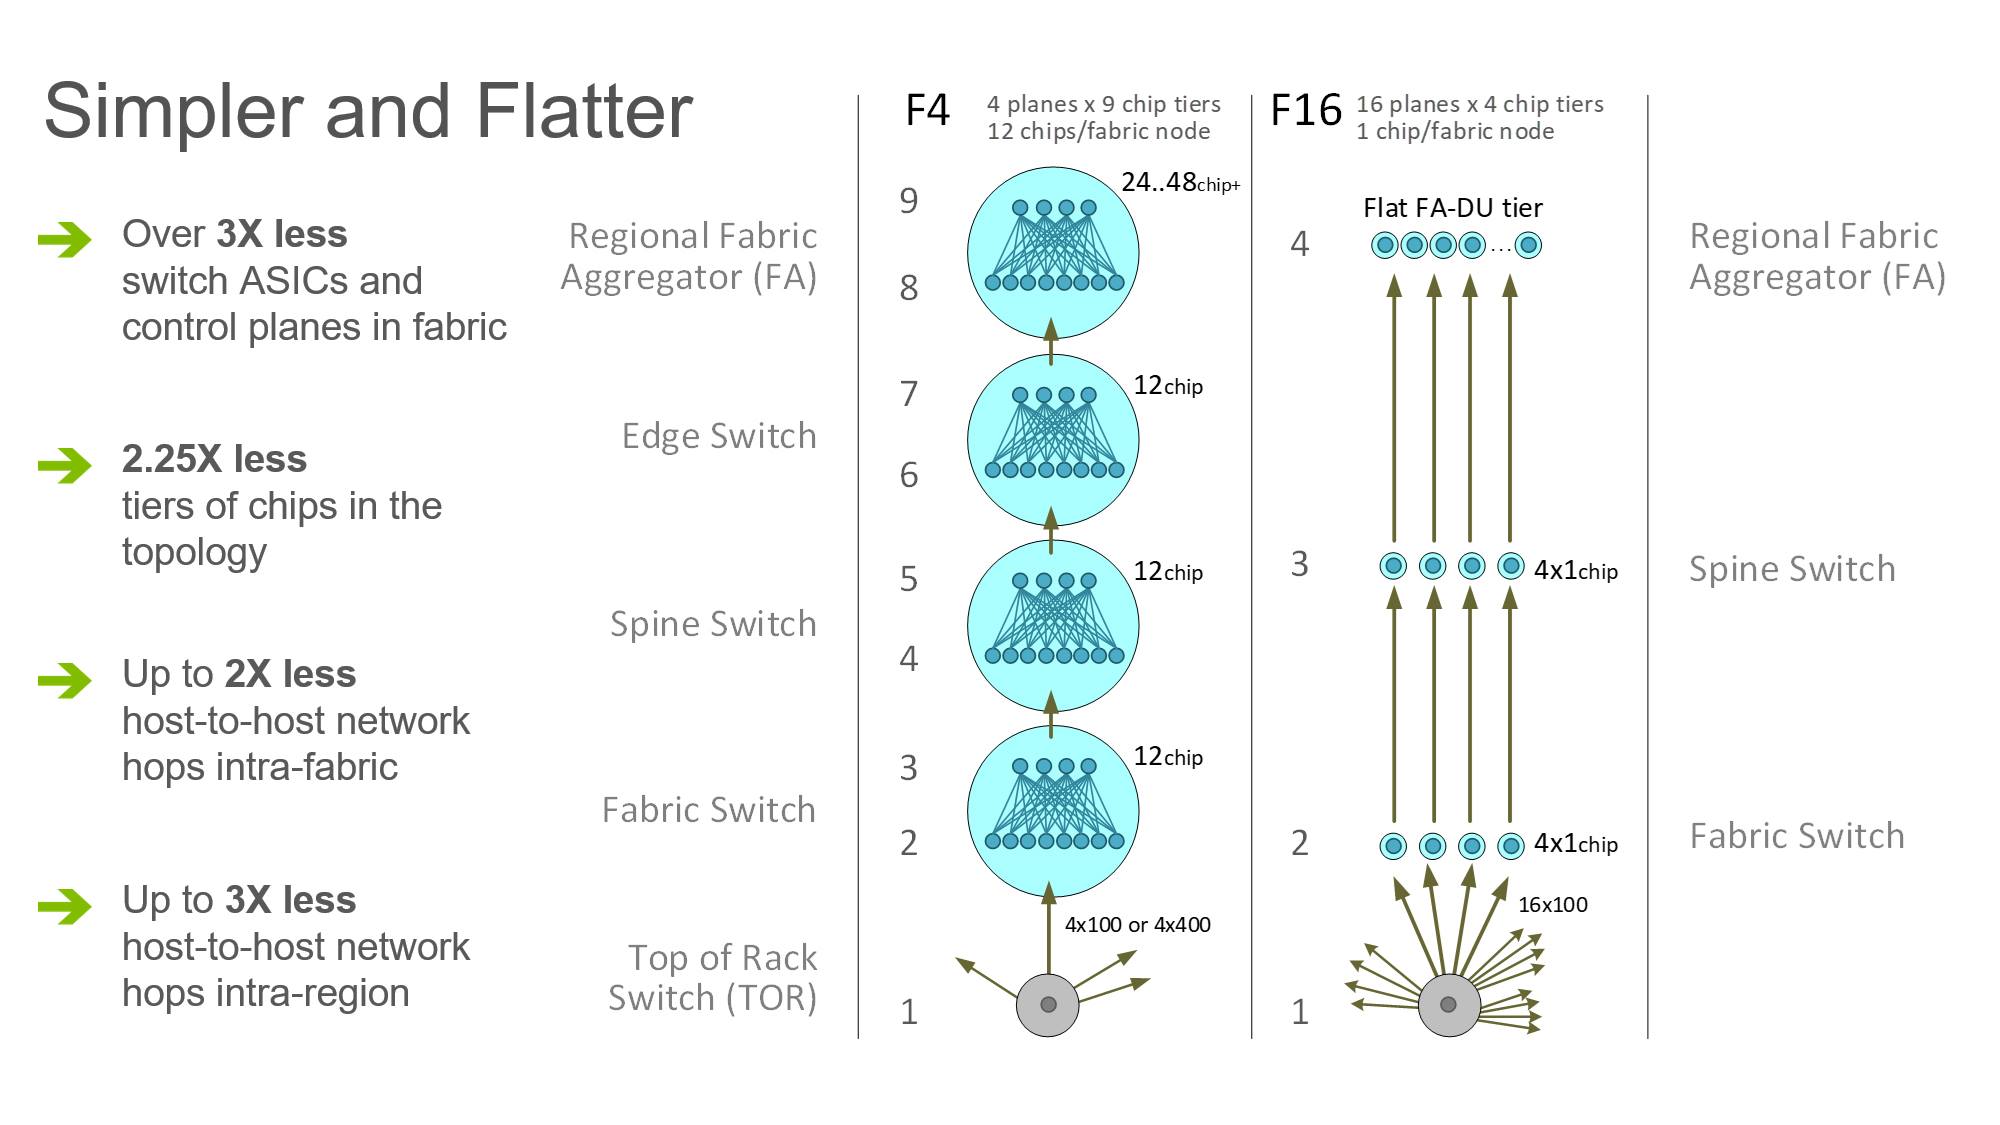 F16 fabric offers 2-3x fewer network hops and queuing points between servers.